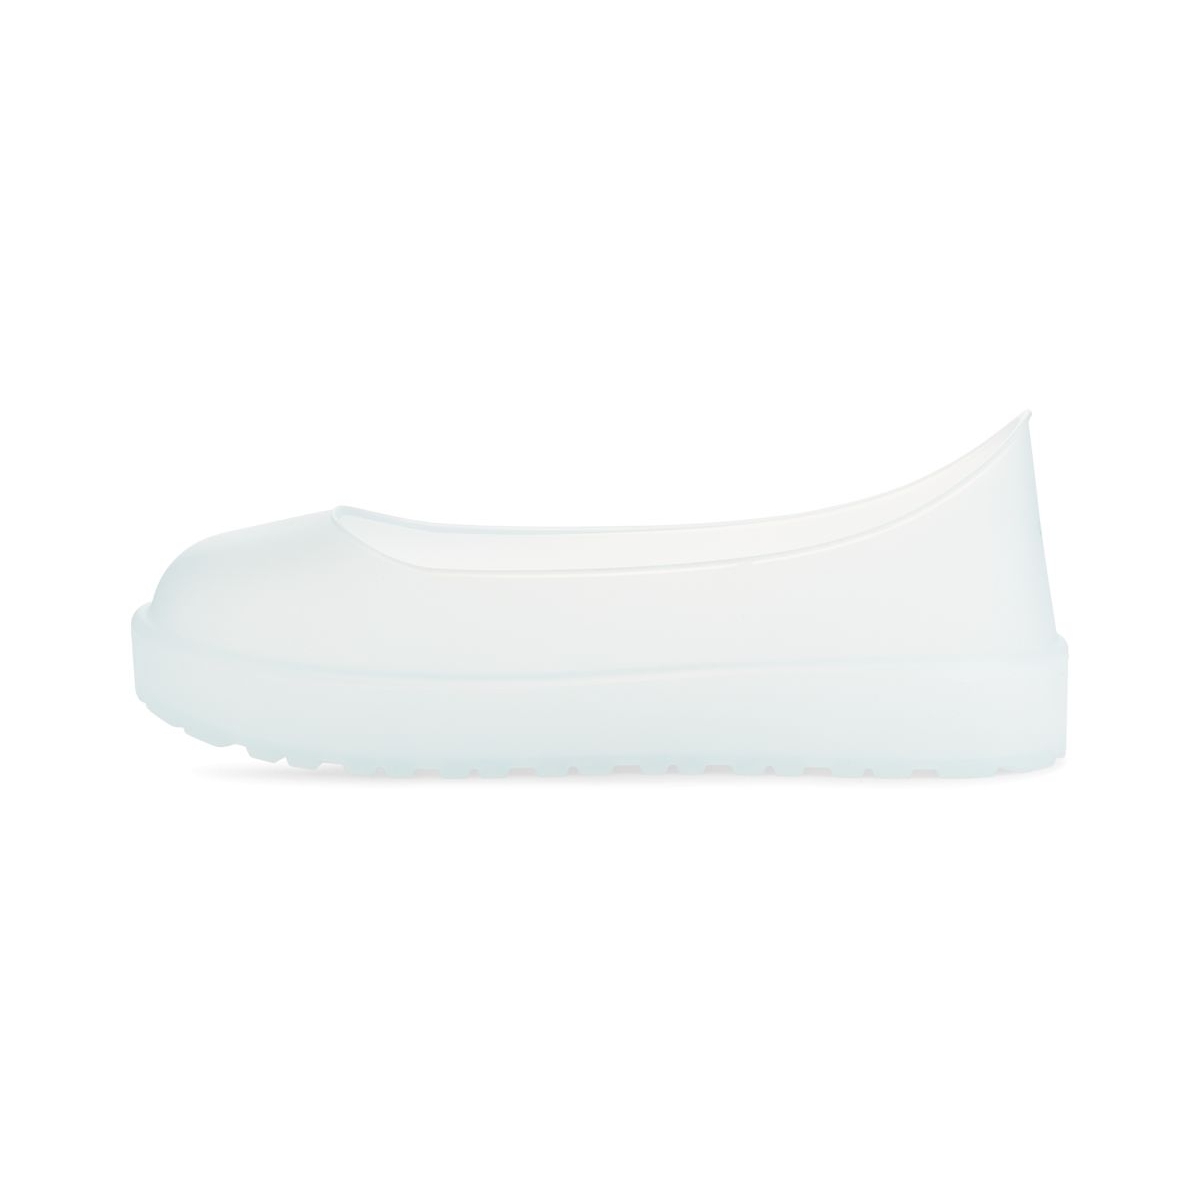 UGG Unisex Boot Guard Silicone Rubber Galosh Clear - 1129431-CLR CLEAR - CLEAR, M